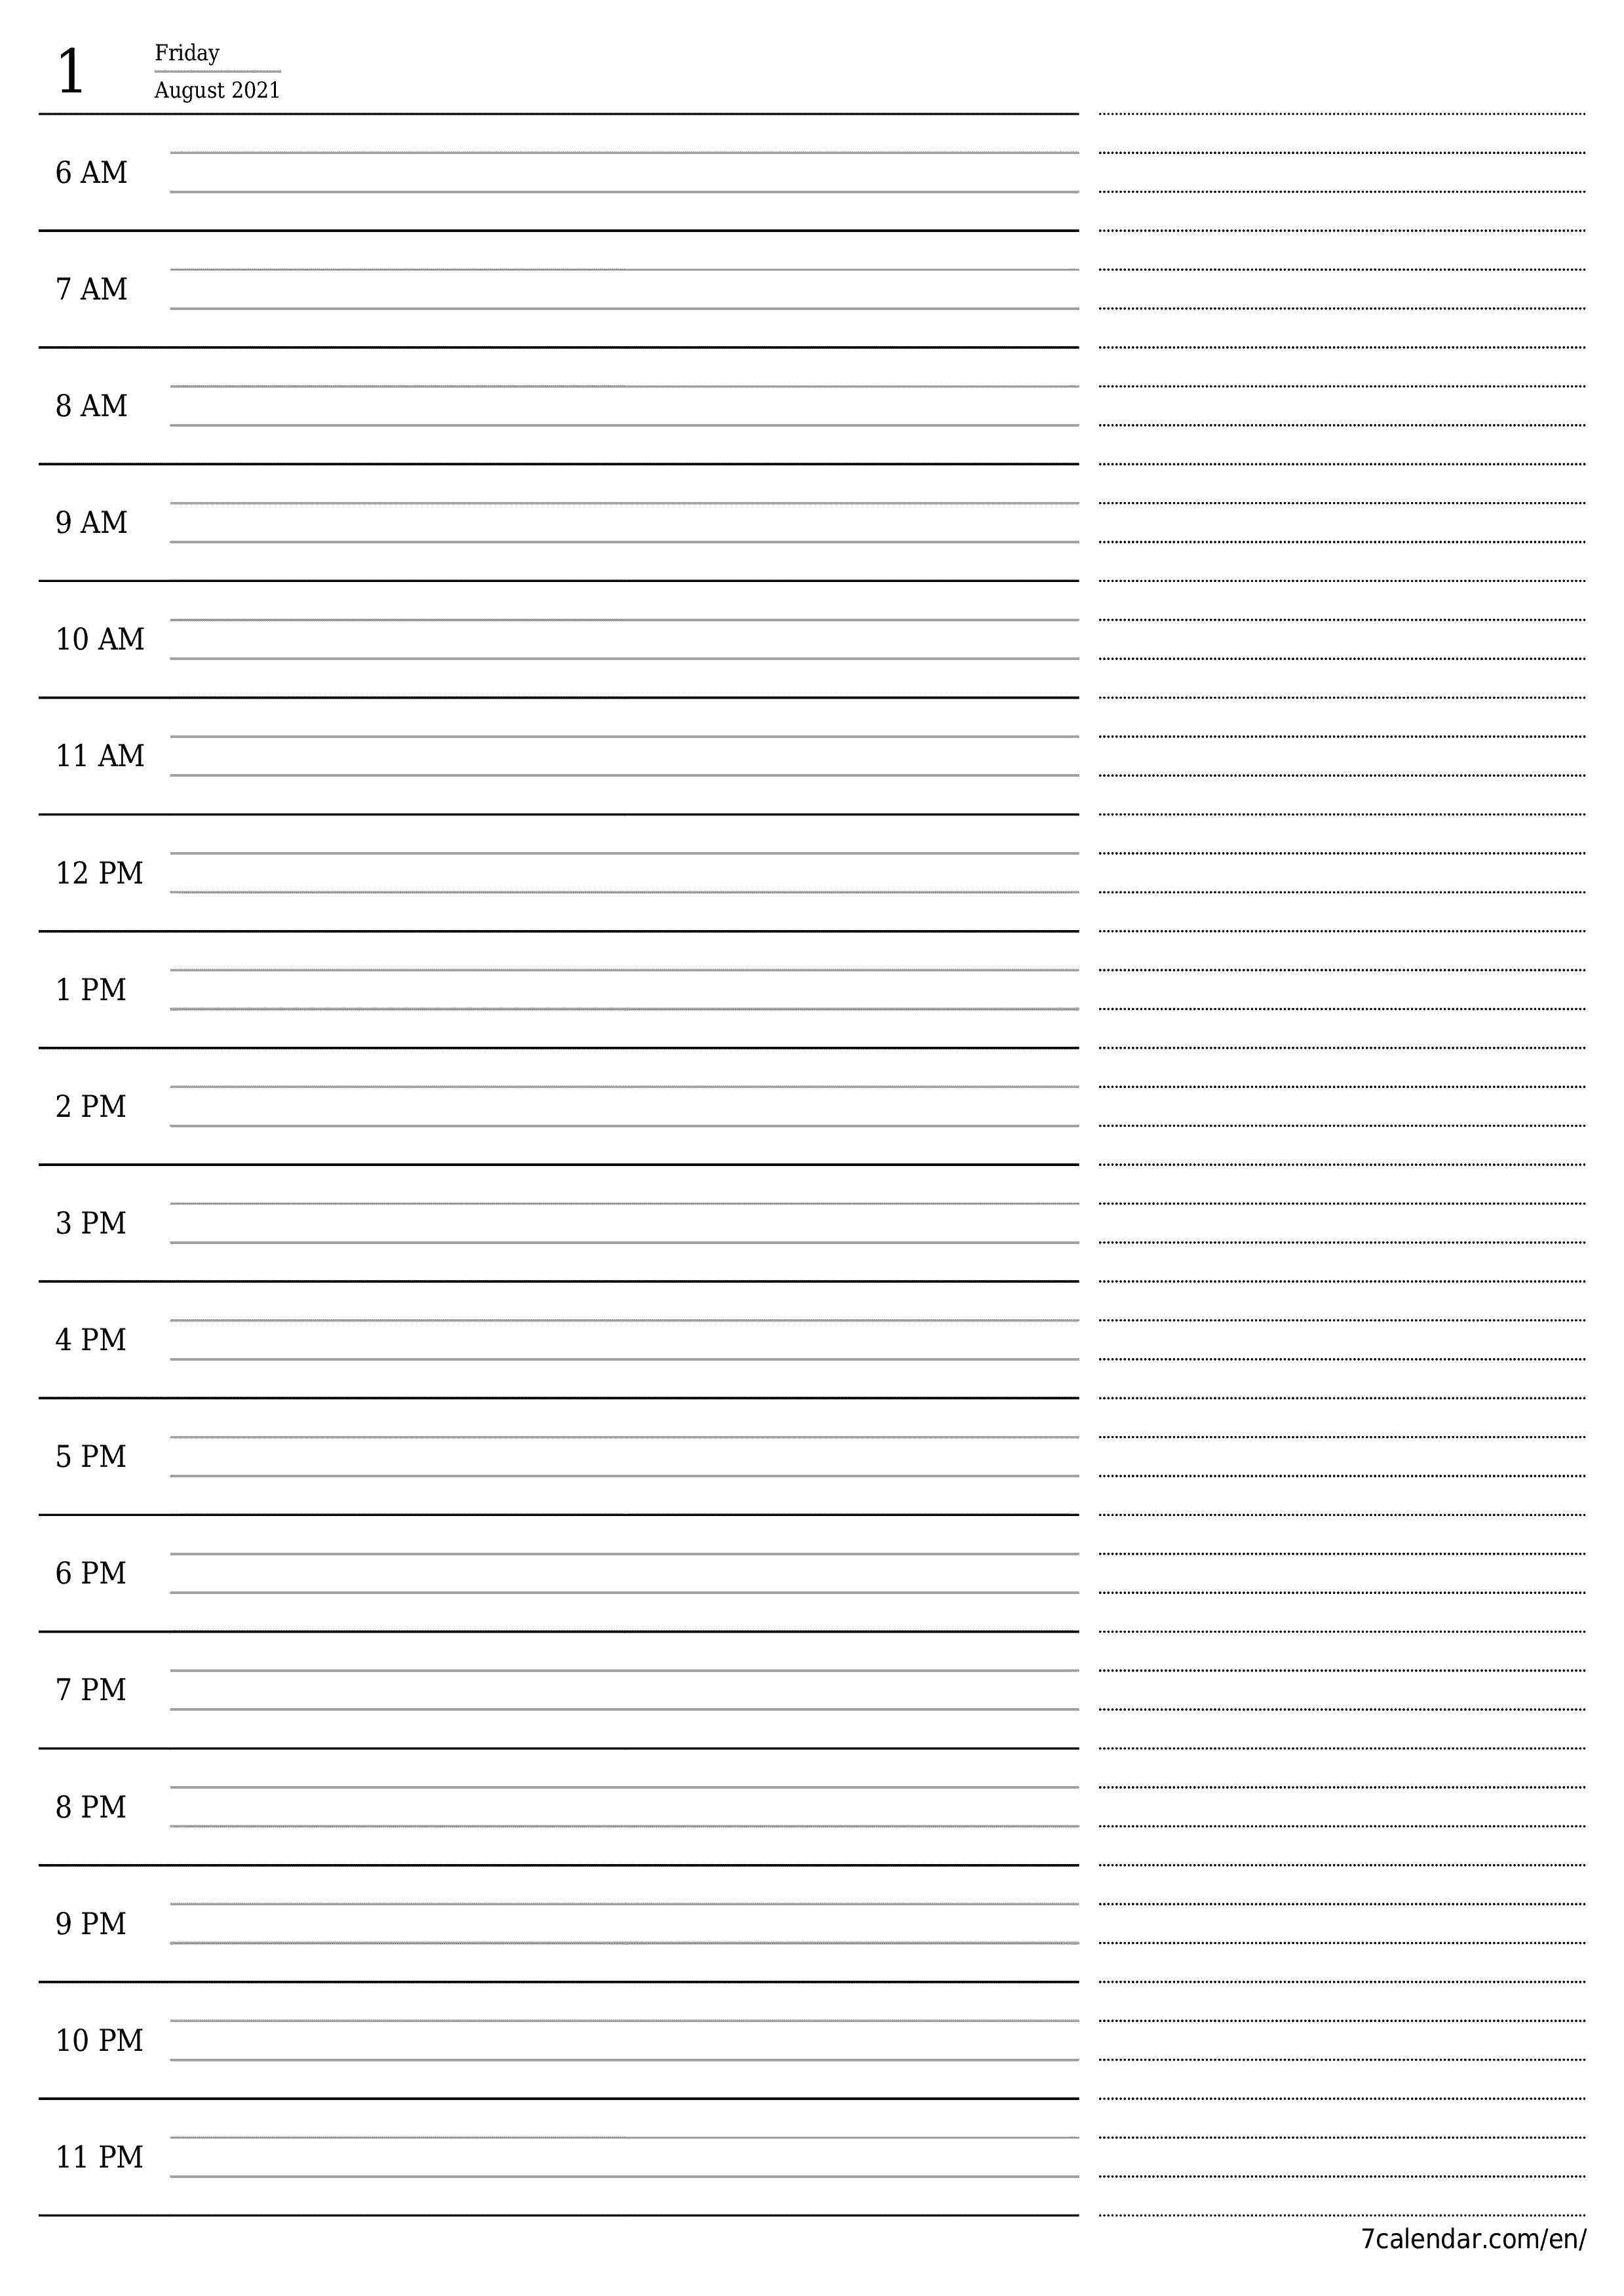 Blank daily calendar planner for day August 2021 with notes, save and print to PDF PNG English - 7calendar.com